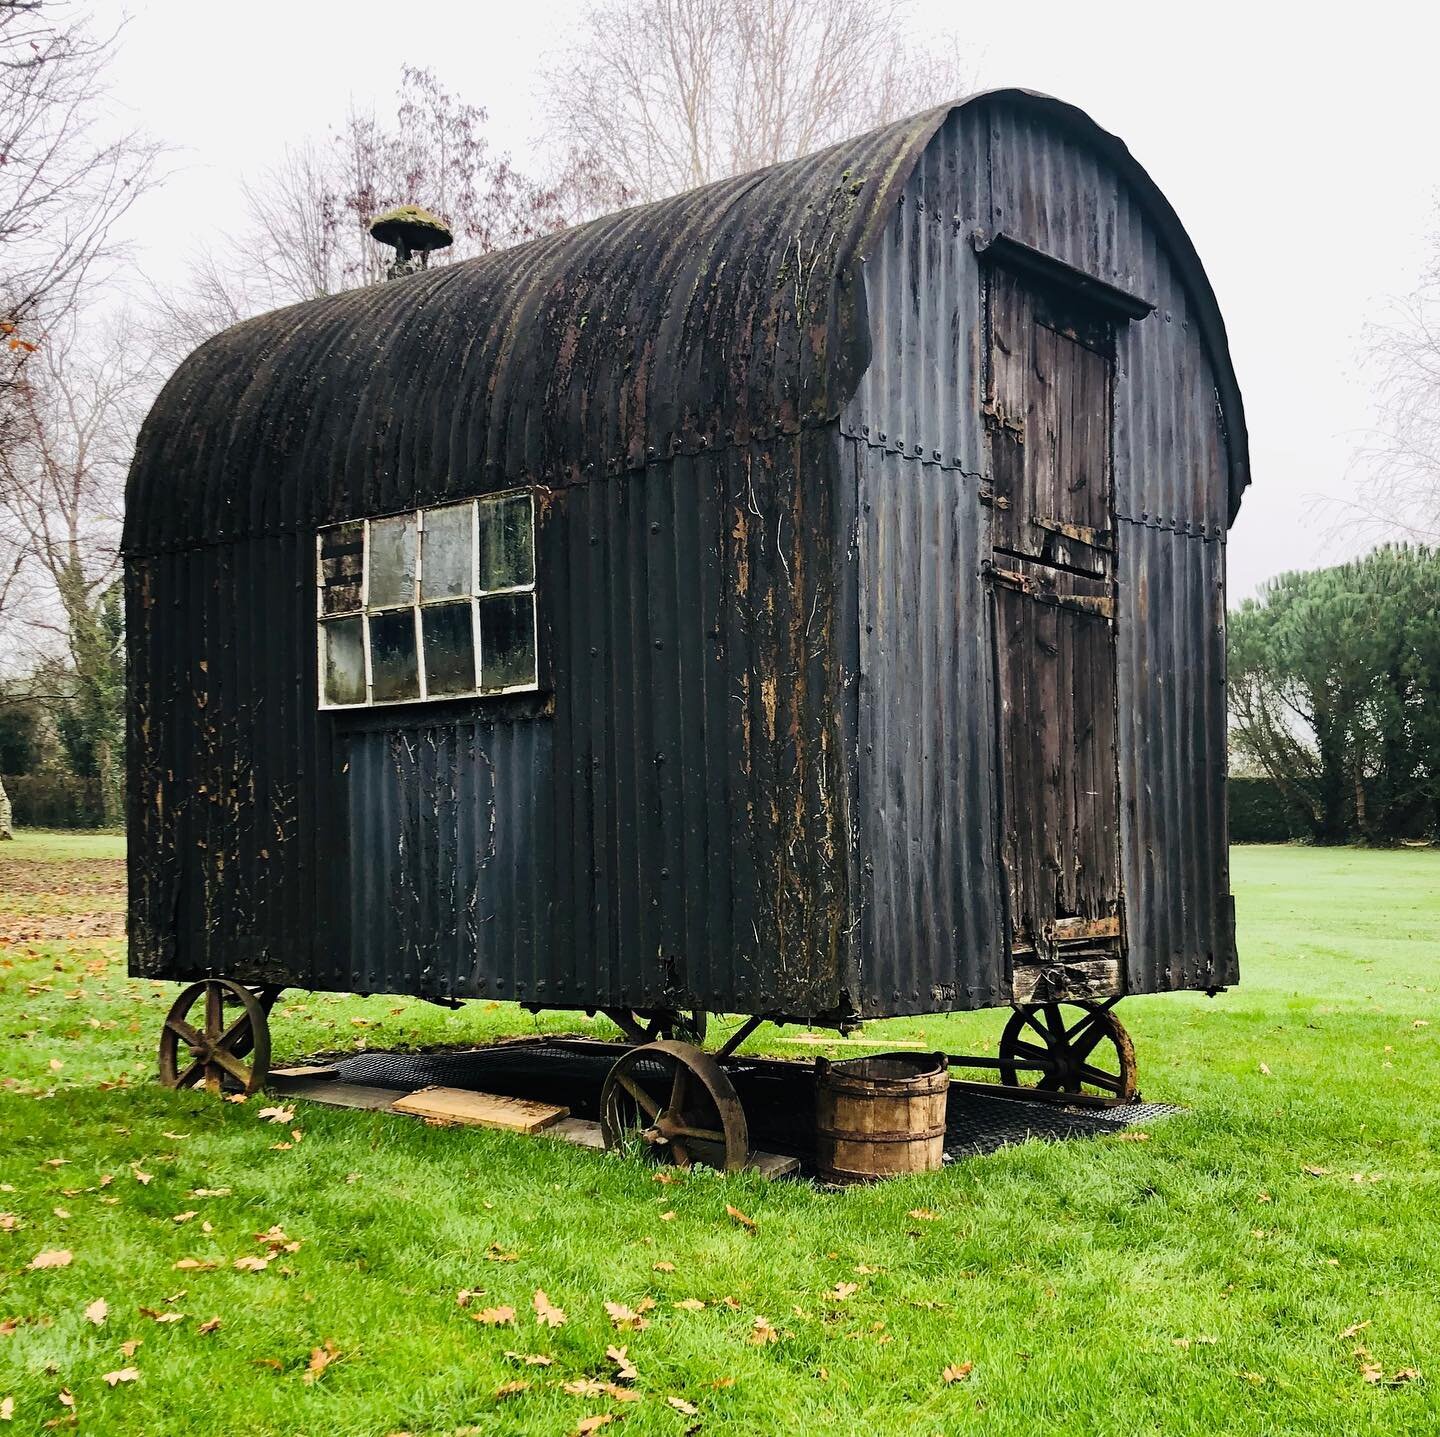 These old huts come in all different shapes and sizes, this little hut is full of character with its pathetically small wheels and axles.  #wonderful #shepherdshuts #hampshire #restorers #gardens #southdownnationalpark #outdoors #outdoorliving #histo